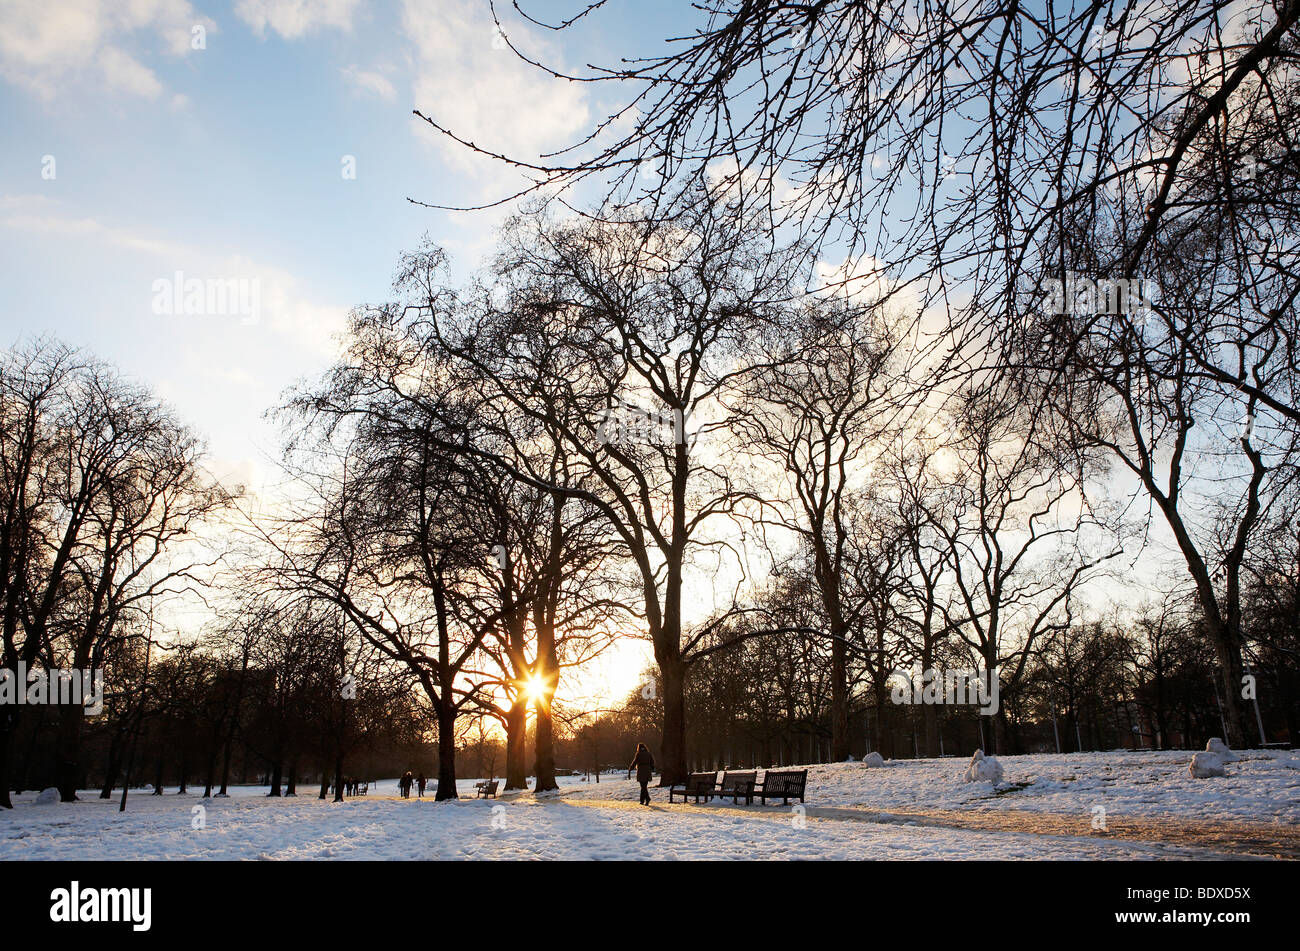 LONDON: ST JAMES' PARK IN THE SNOW Stock Photo